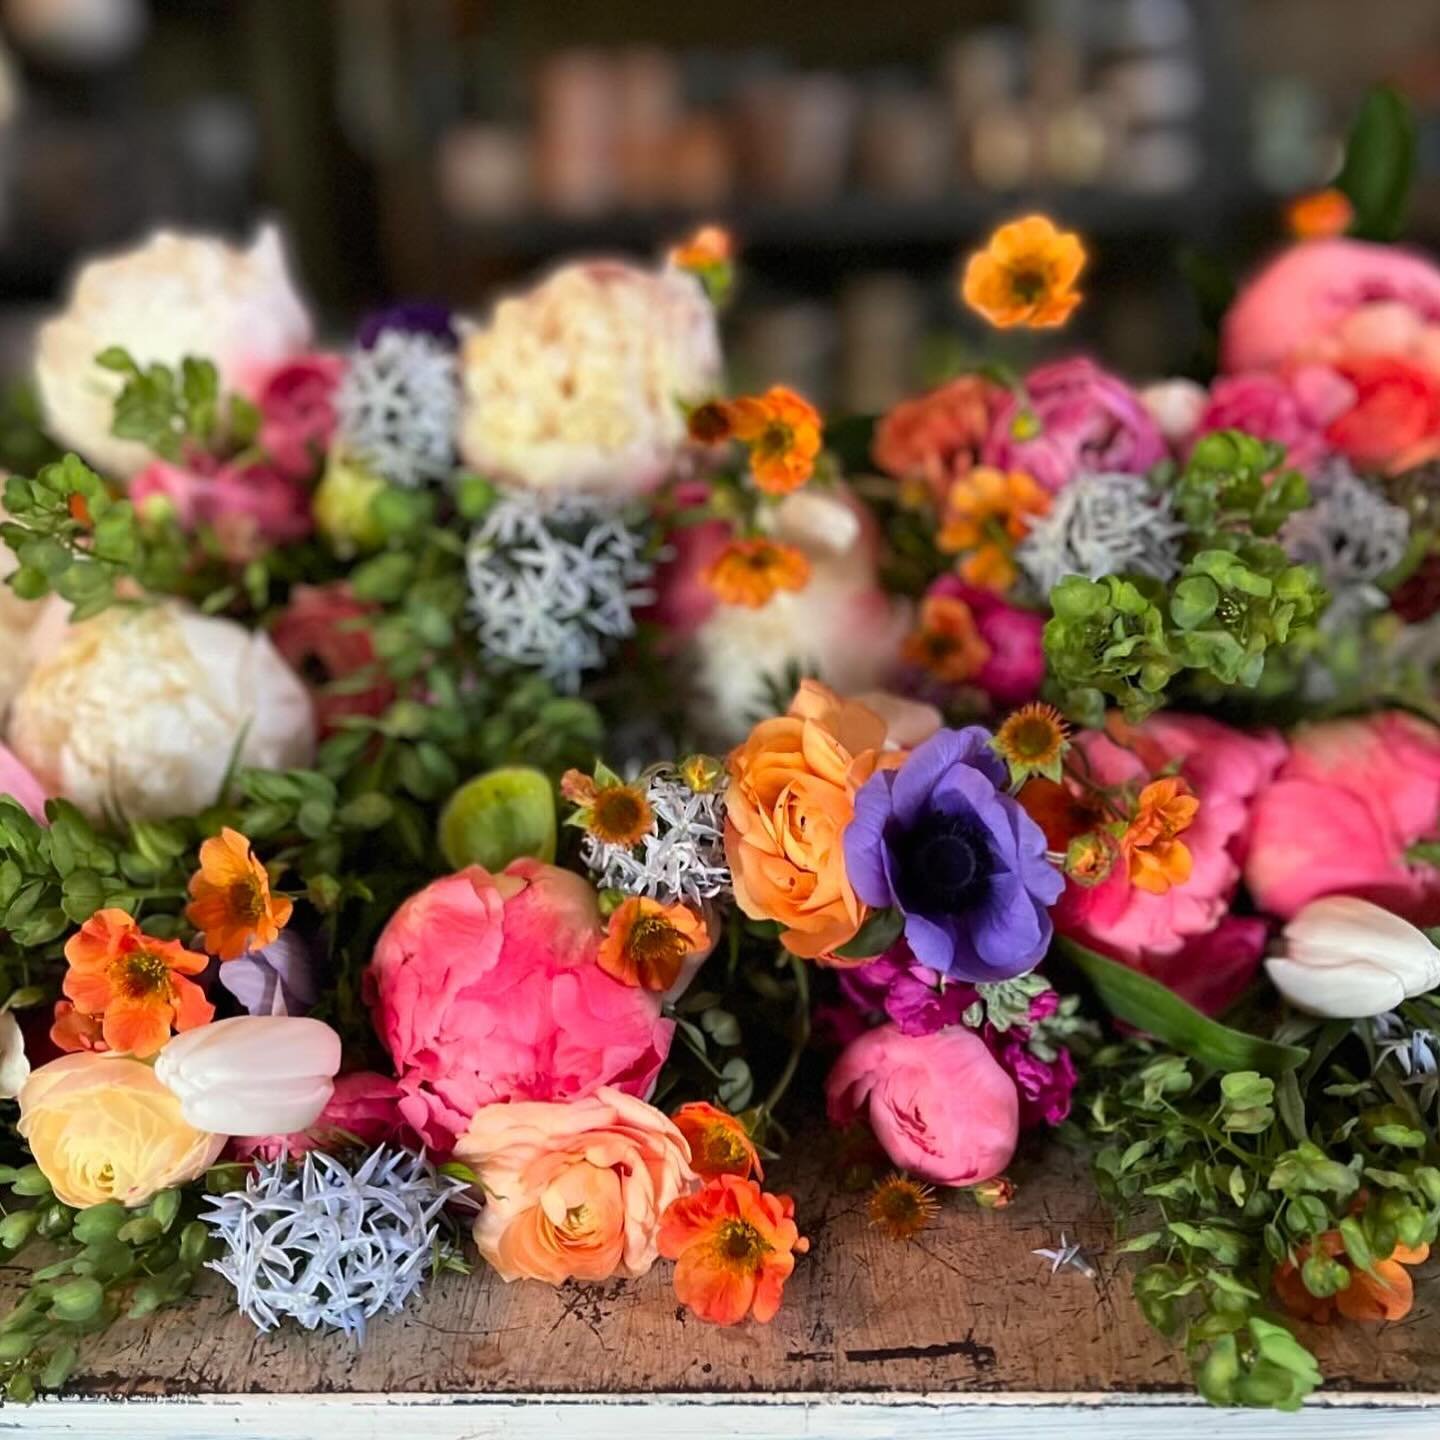 Mothers Day preorders are live online! Limited quantities- peonies, snaps, ranunculus and other spring beauties 😍 @workskennettsquare or farm pickup selection at checkout ❤️ #brandywinevalley #pagrown #chestercountypa